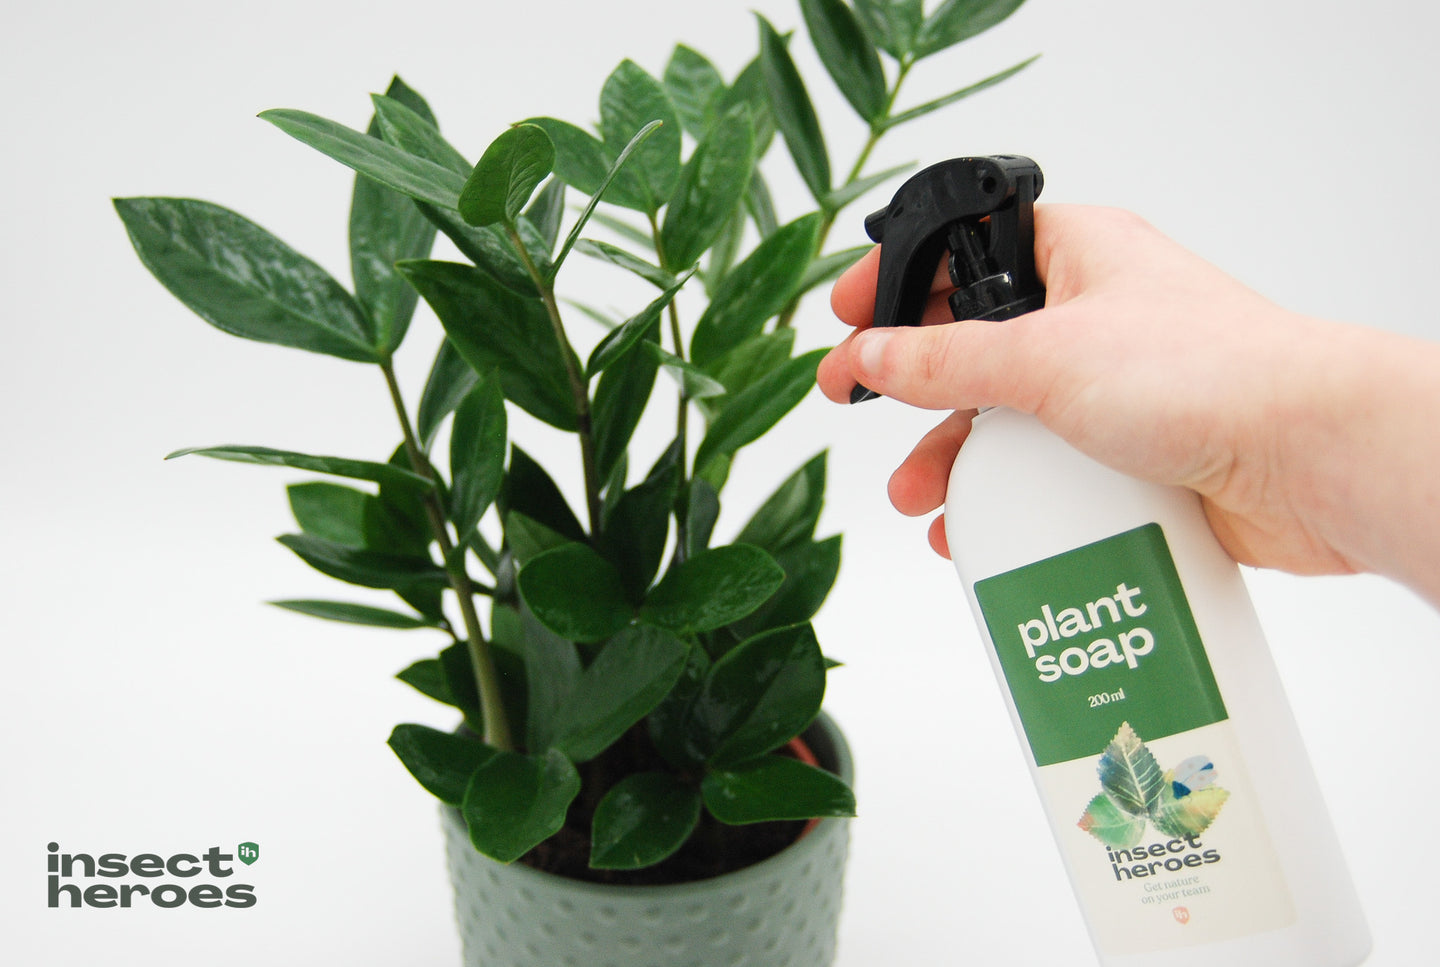 Clean the plant with Insect Heroes soap